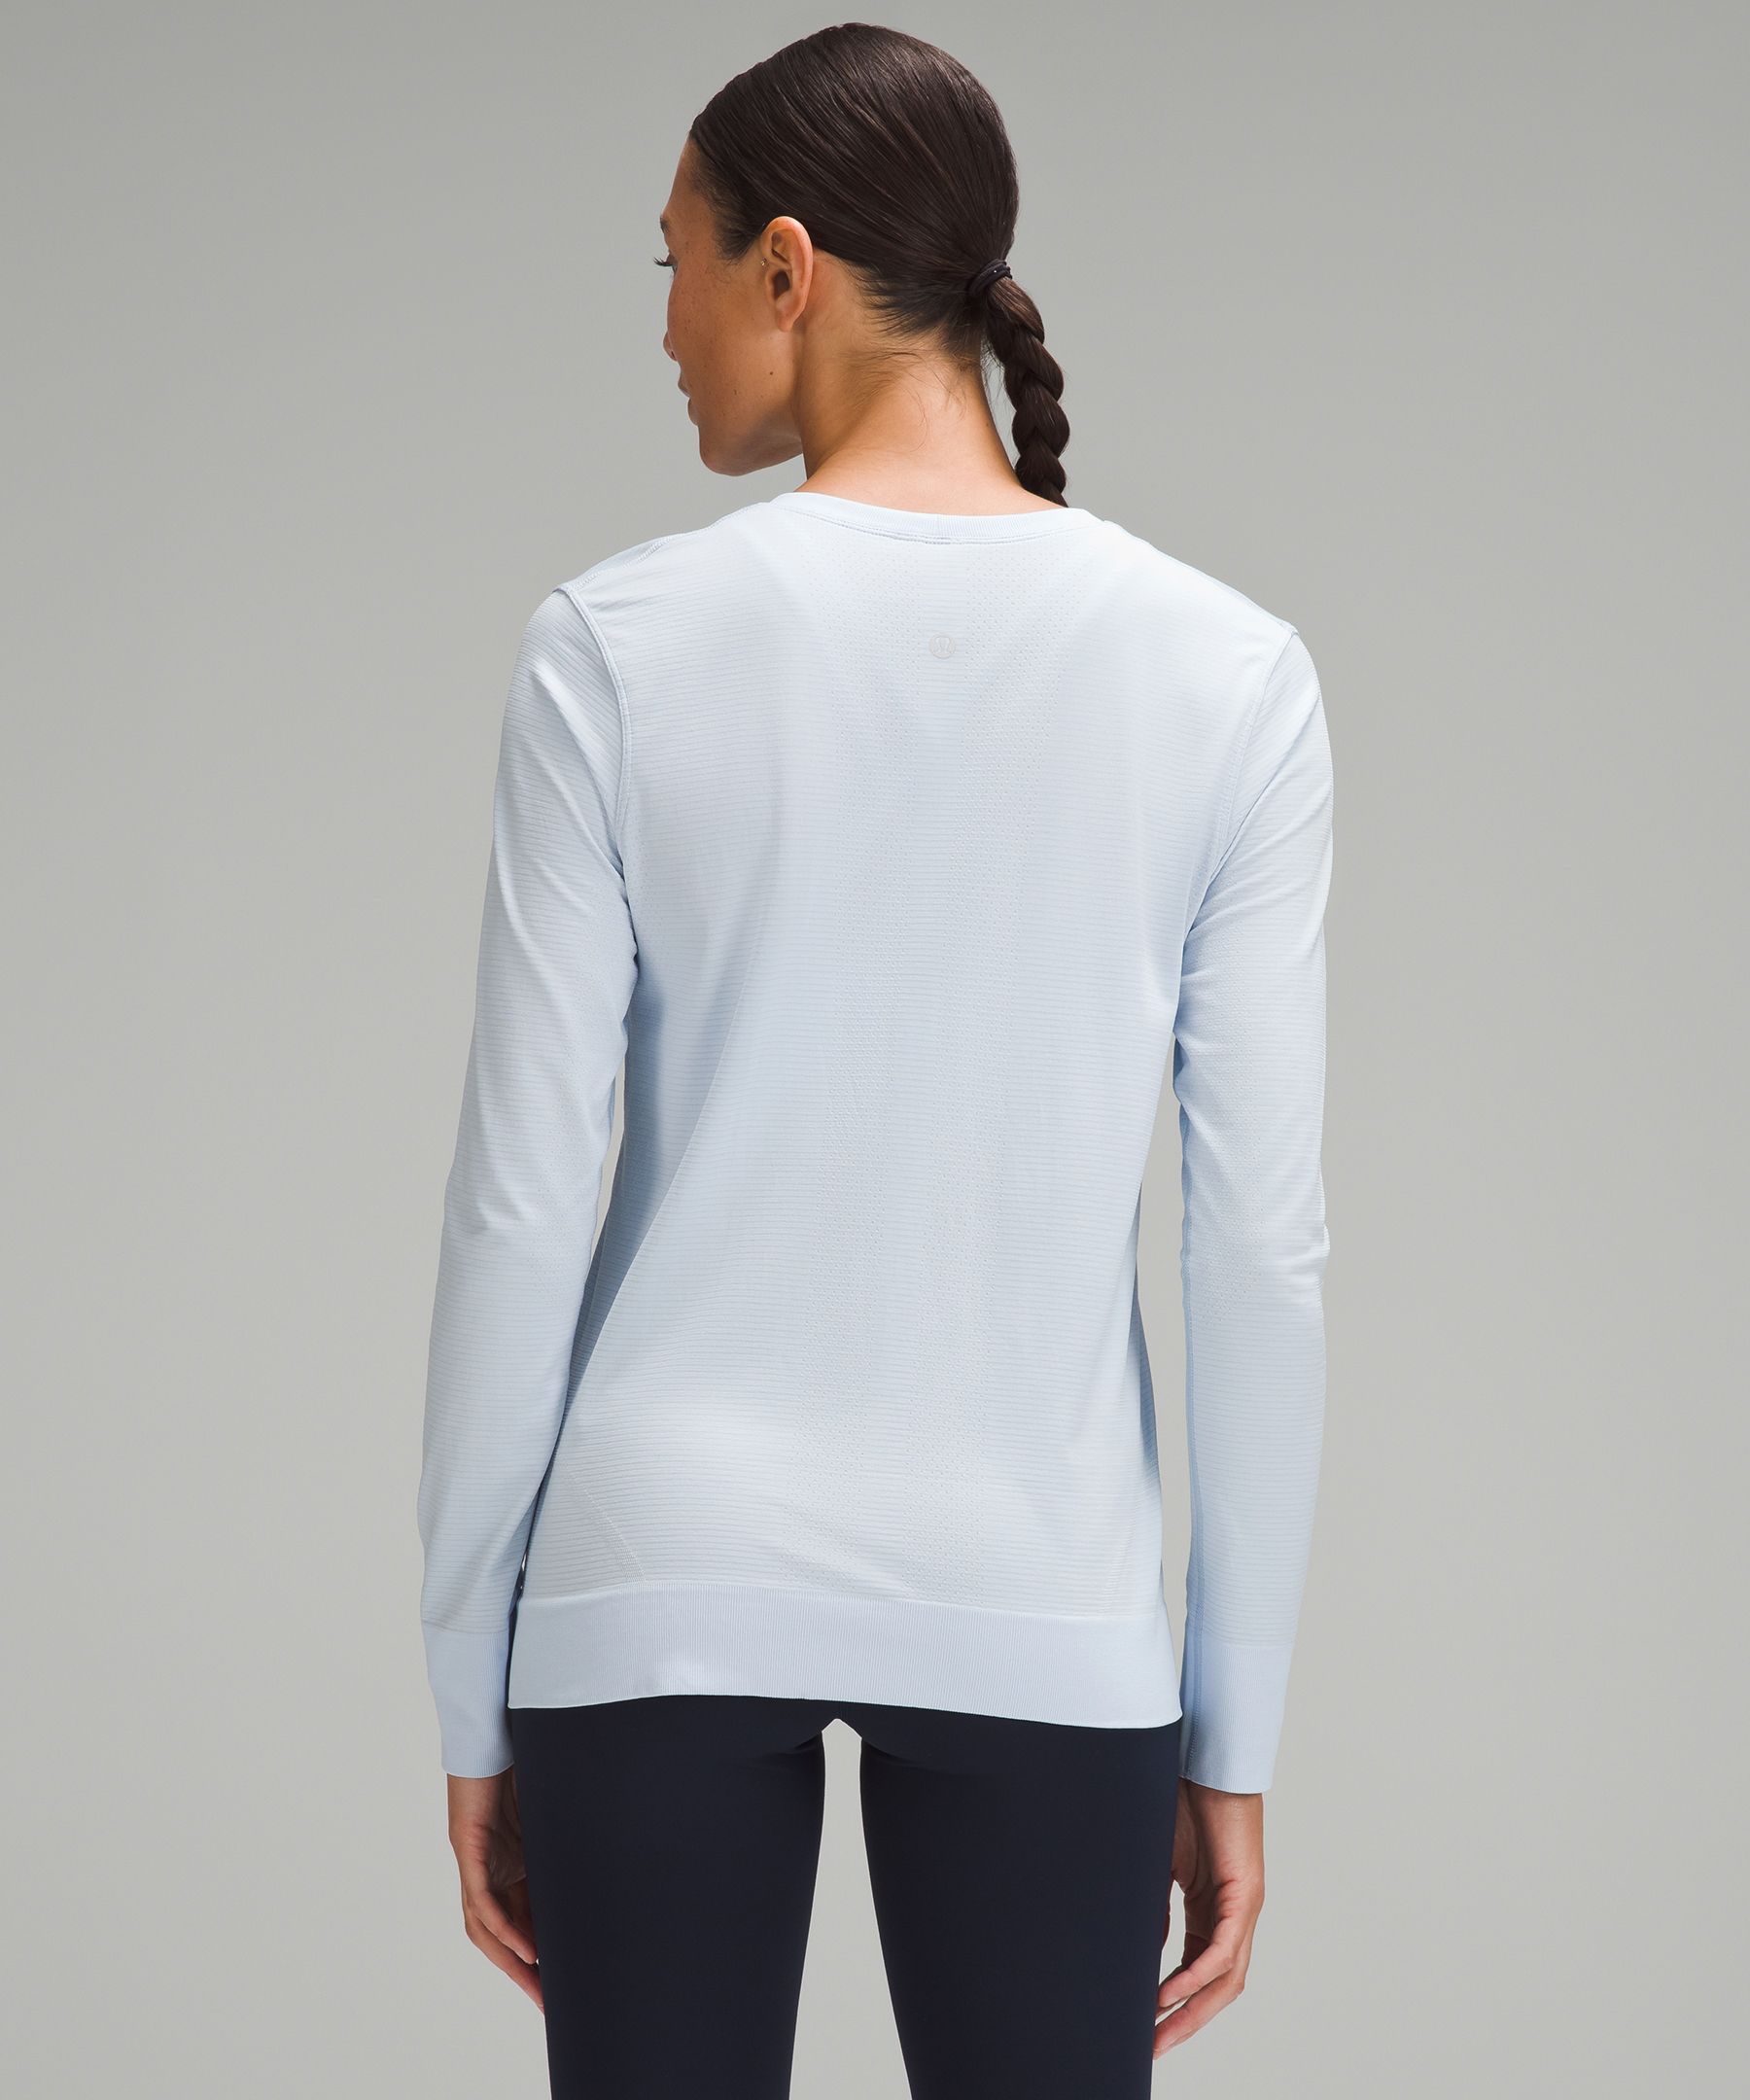 lululemon athletica Swiftly Relaxed Long-sleeve Shirt in Purple